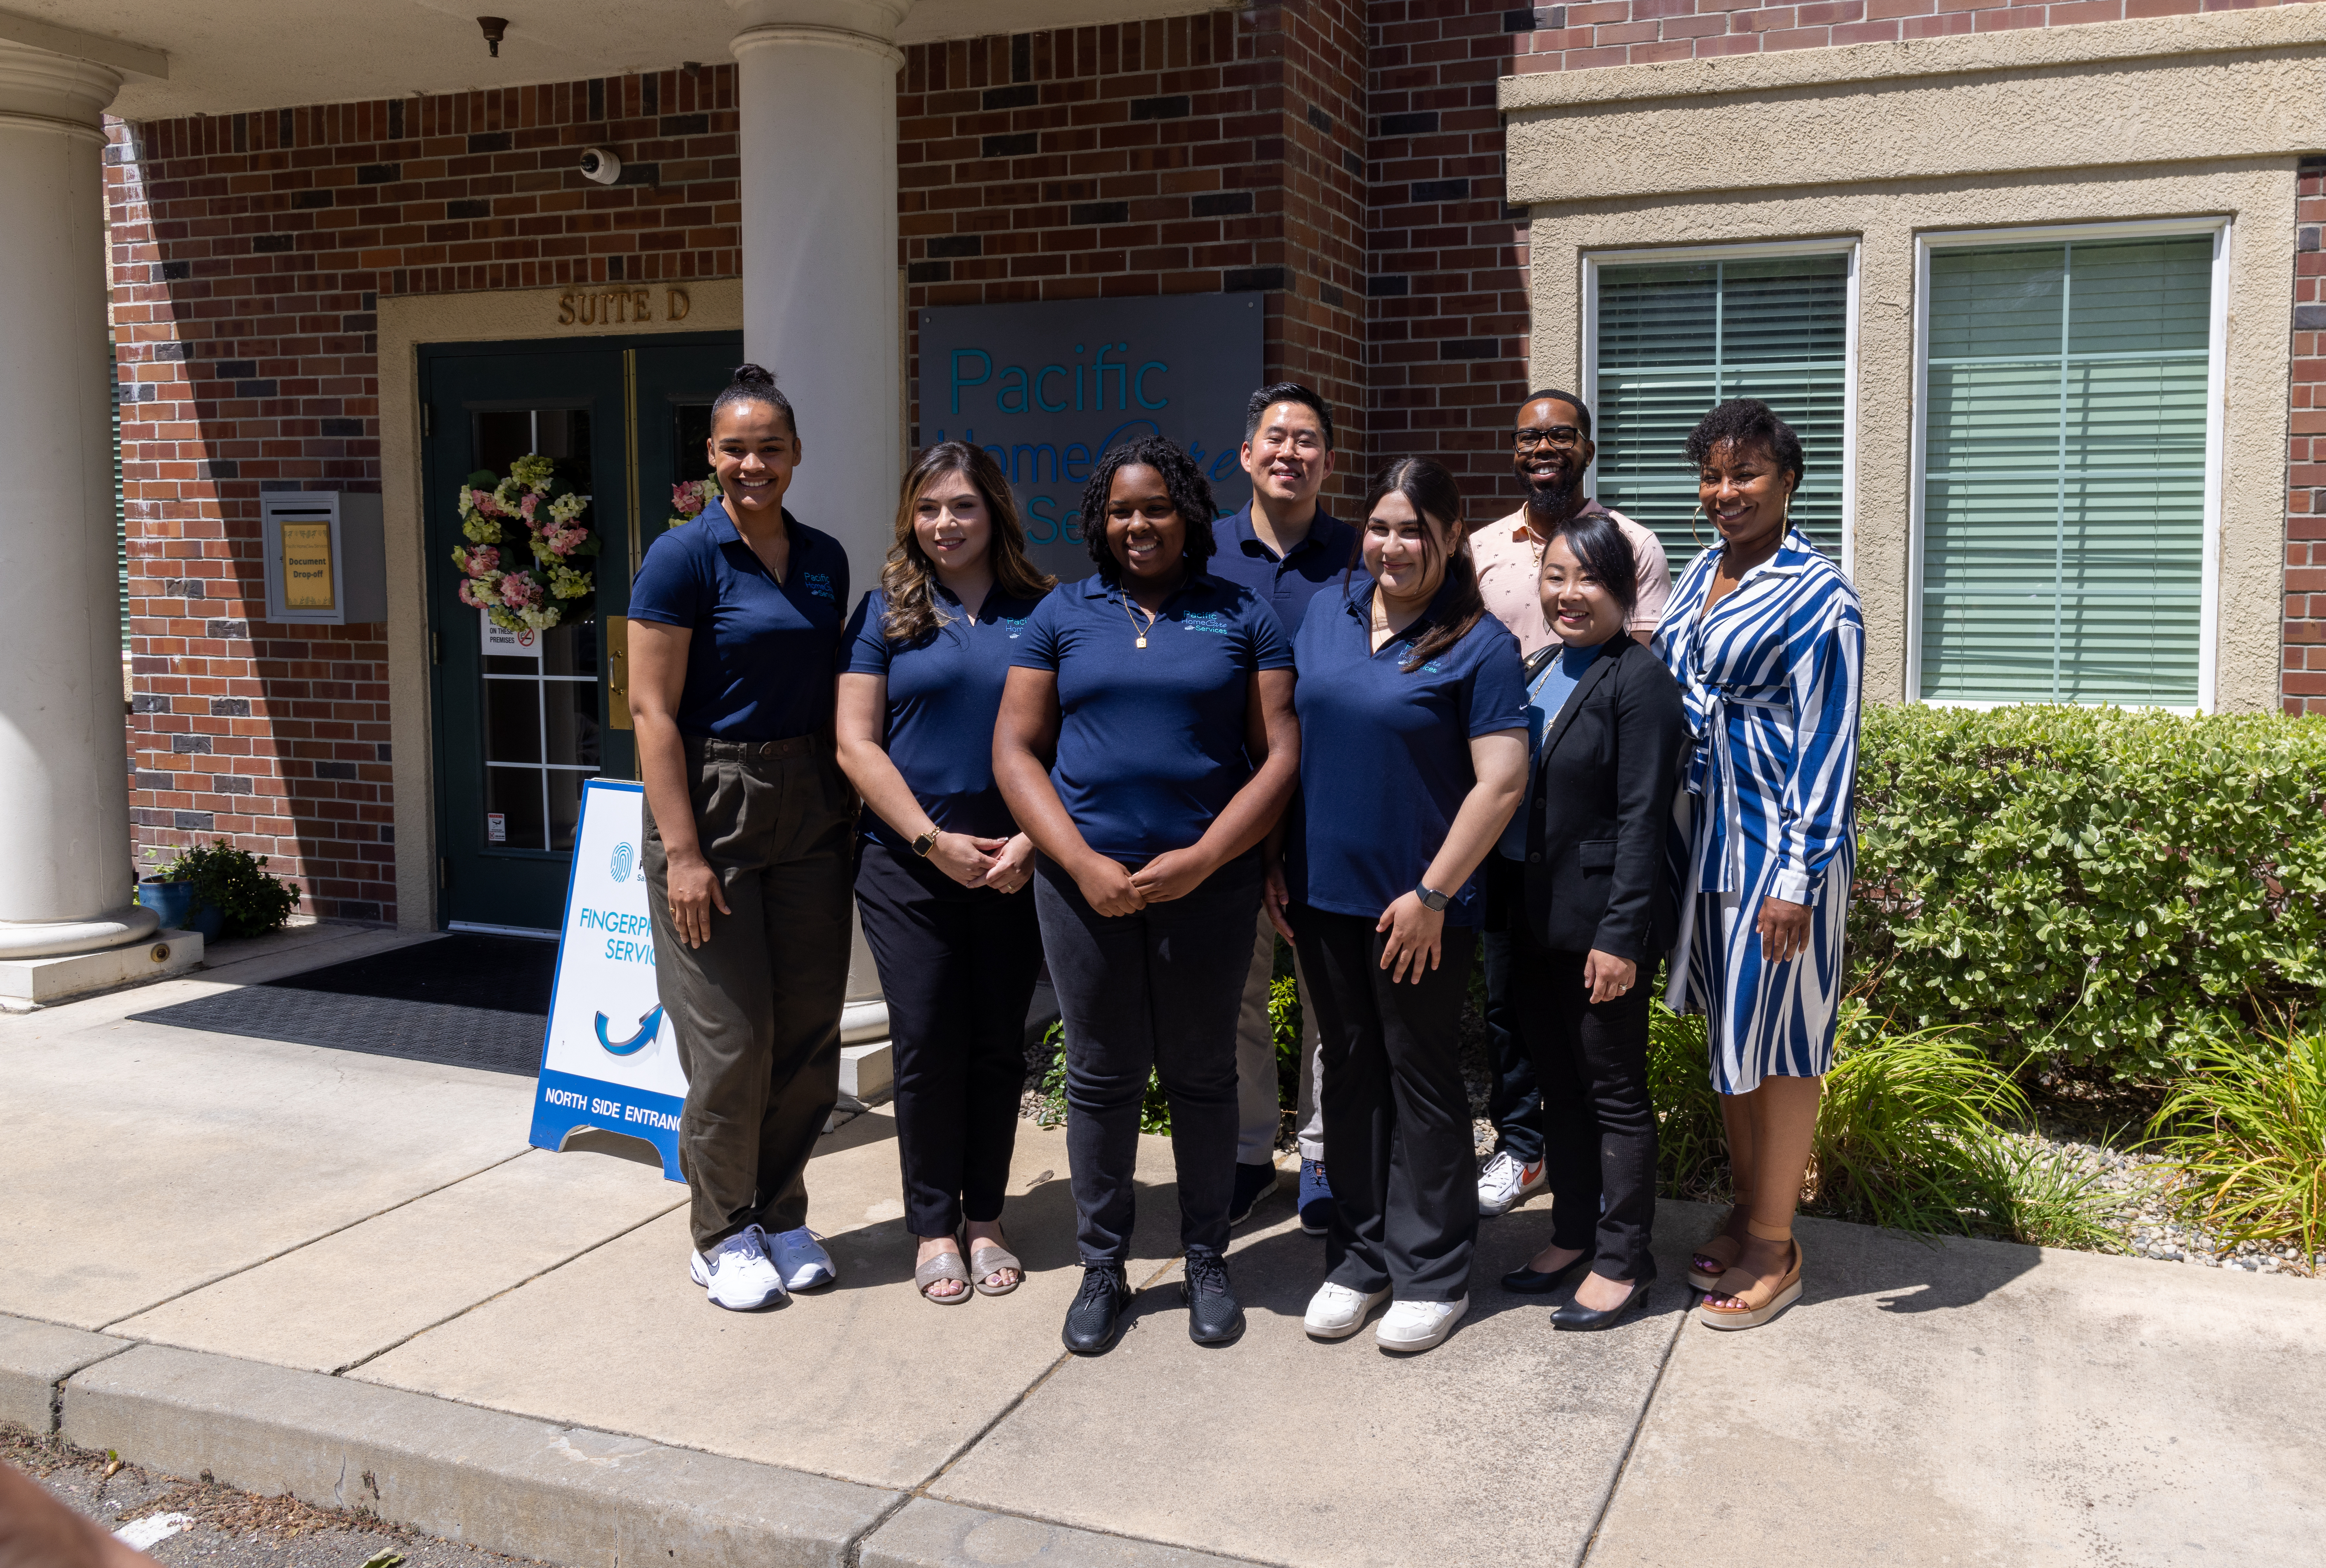 The image shows a group of eight professionals from Pacific Homecare Services posing together outside their office building. They are dressed in matching navy blue shirts, standing confidently in front of the building's entrance, which is marked by a sign that reads 